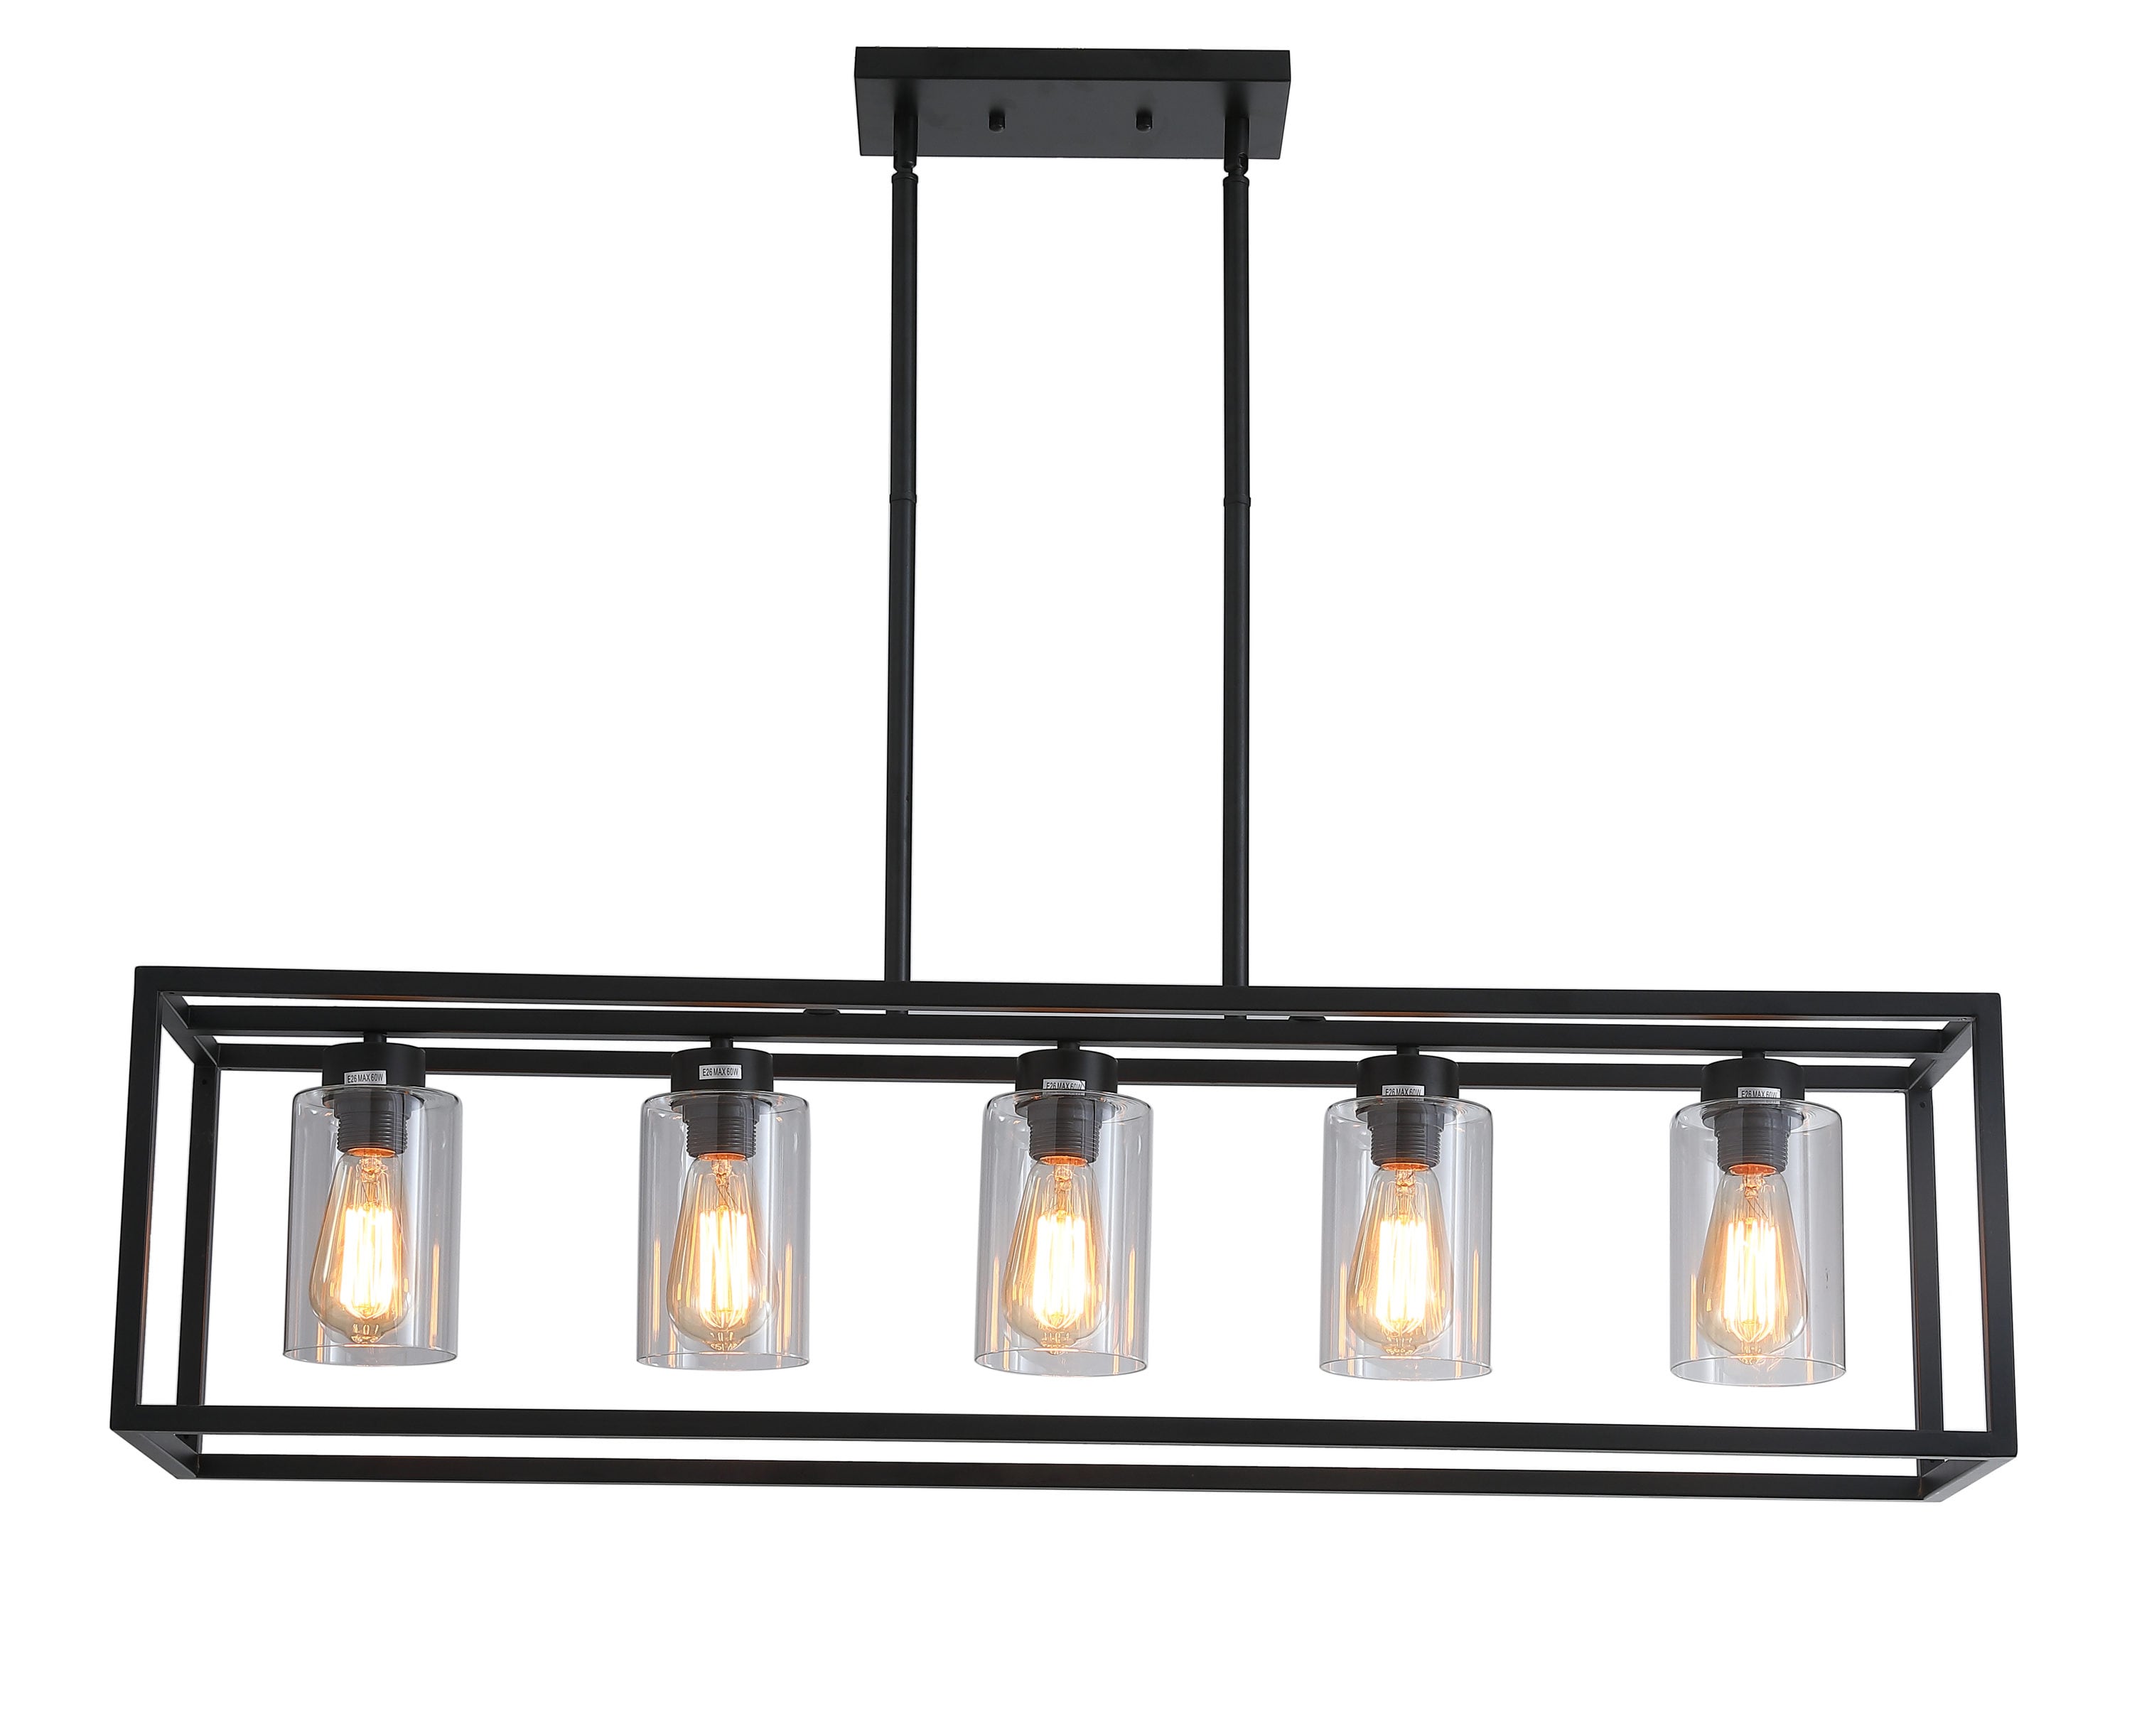 VINLUZ 1 Light Farmhouse Pendant Lighting Black Wood Accents Rustic Square Chandelier with Clear Glass Shade Contemporary Modern Kitchen Island Lights Fixtures Ceiling Hanging Dining Room Hallway